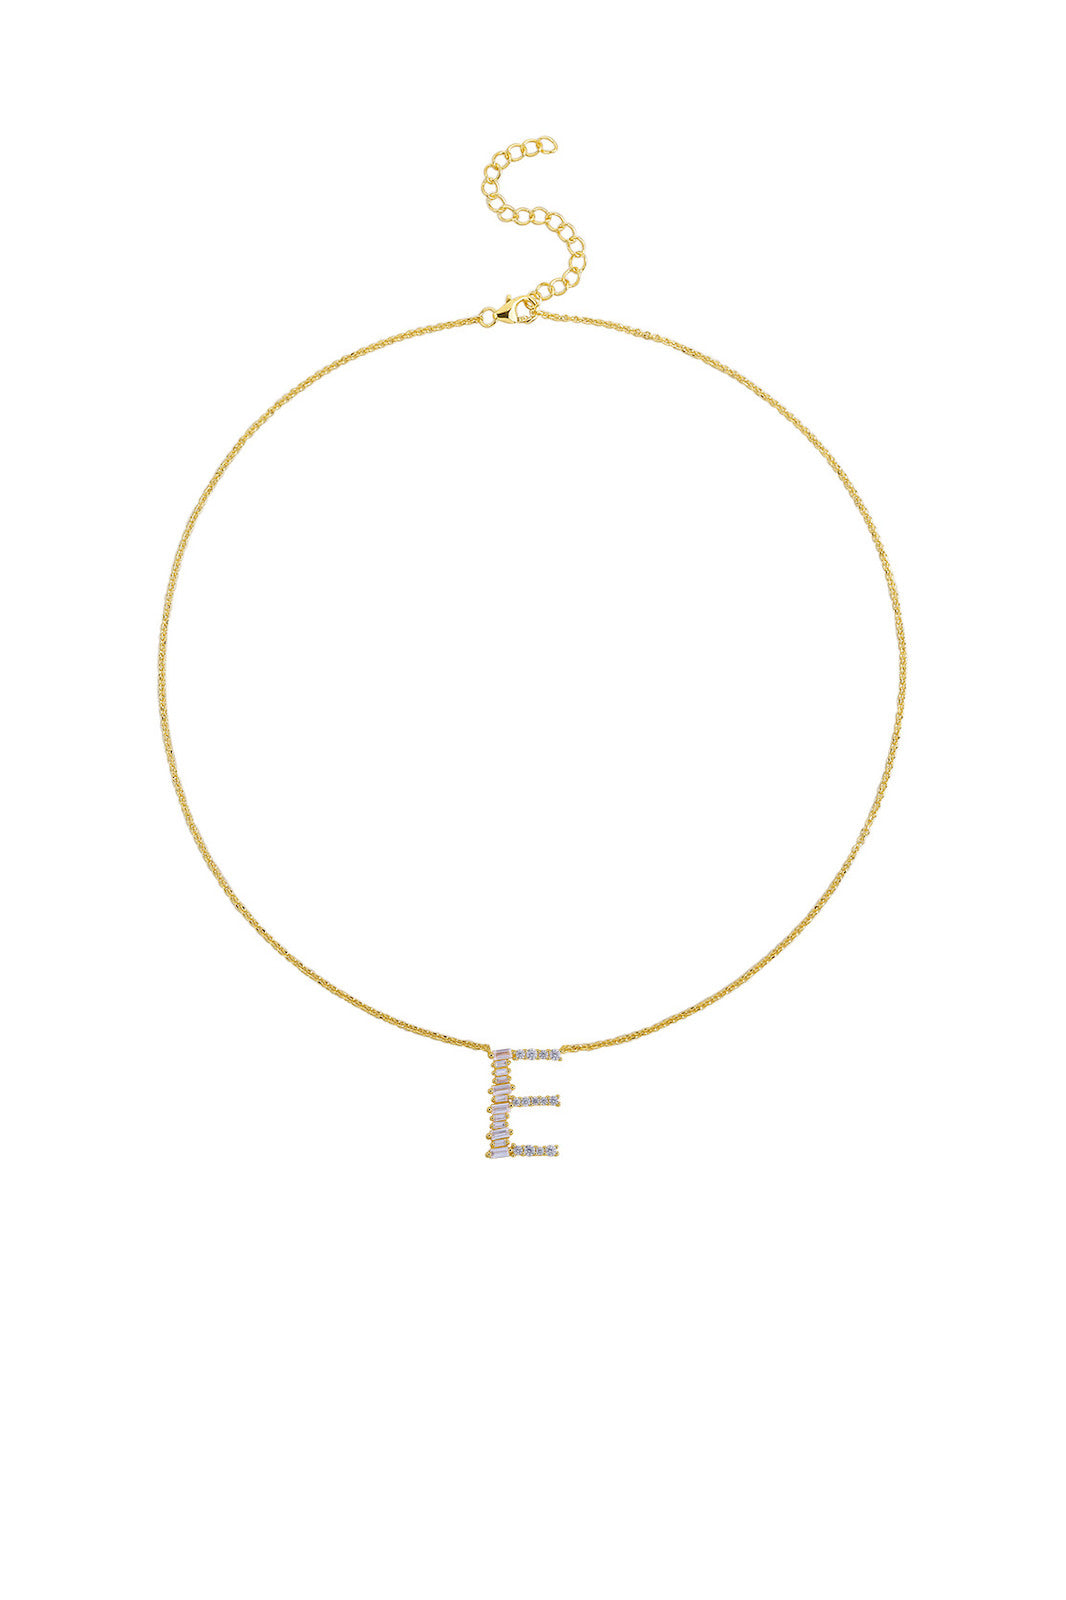 Gold Plated Sterling Silver Initial Necklace - Letter E Detail